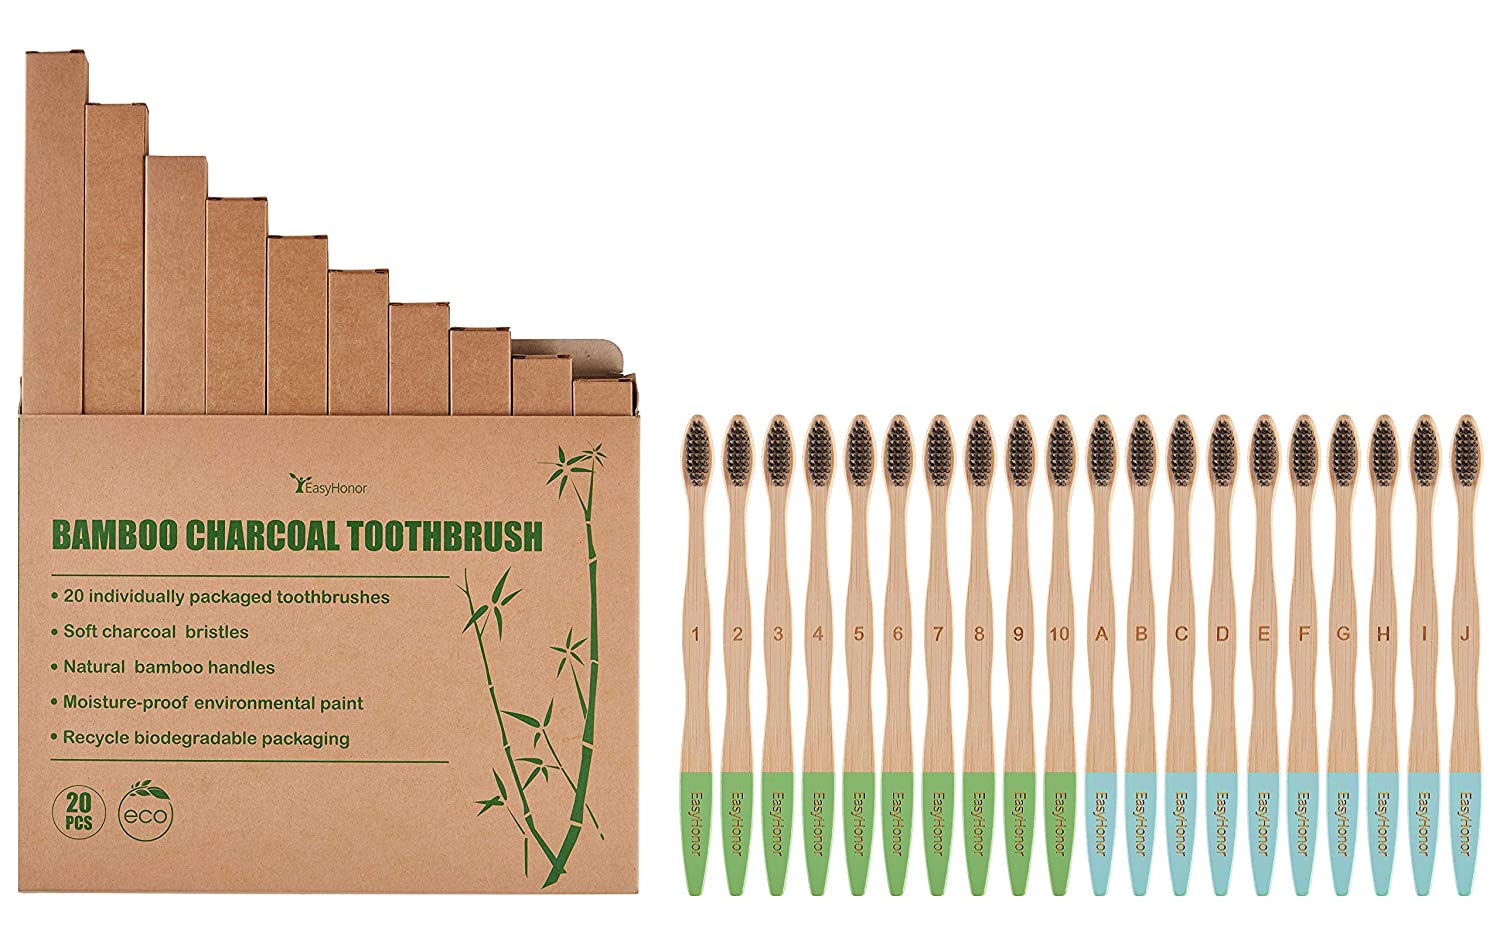 DEasyHonor 20 Pack Bamboo Charcoal Toothbrushes for Adults and Teenagers, Biodegradable Organic bamboo eco friendly toothbrushes, with Ergonomic Handles and Soft Charcoal Bristles BPA Free